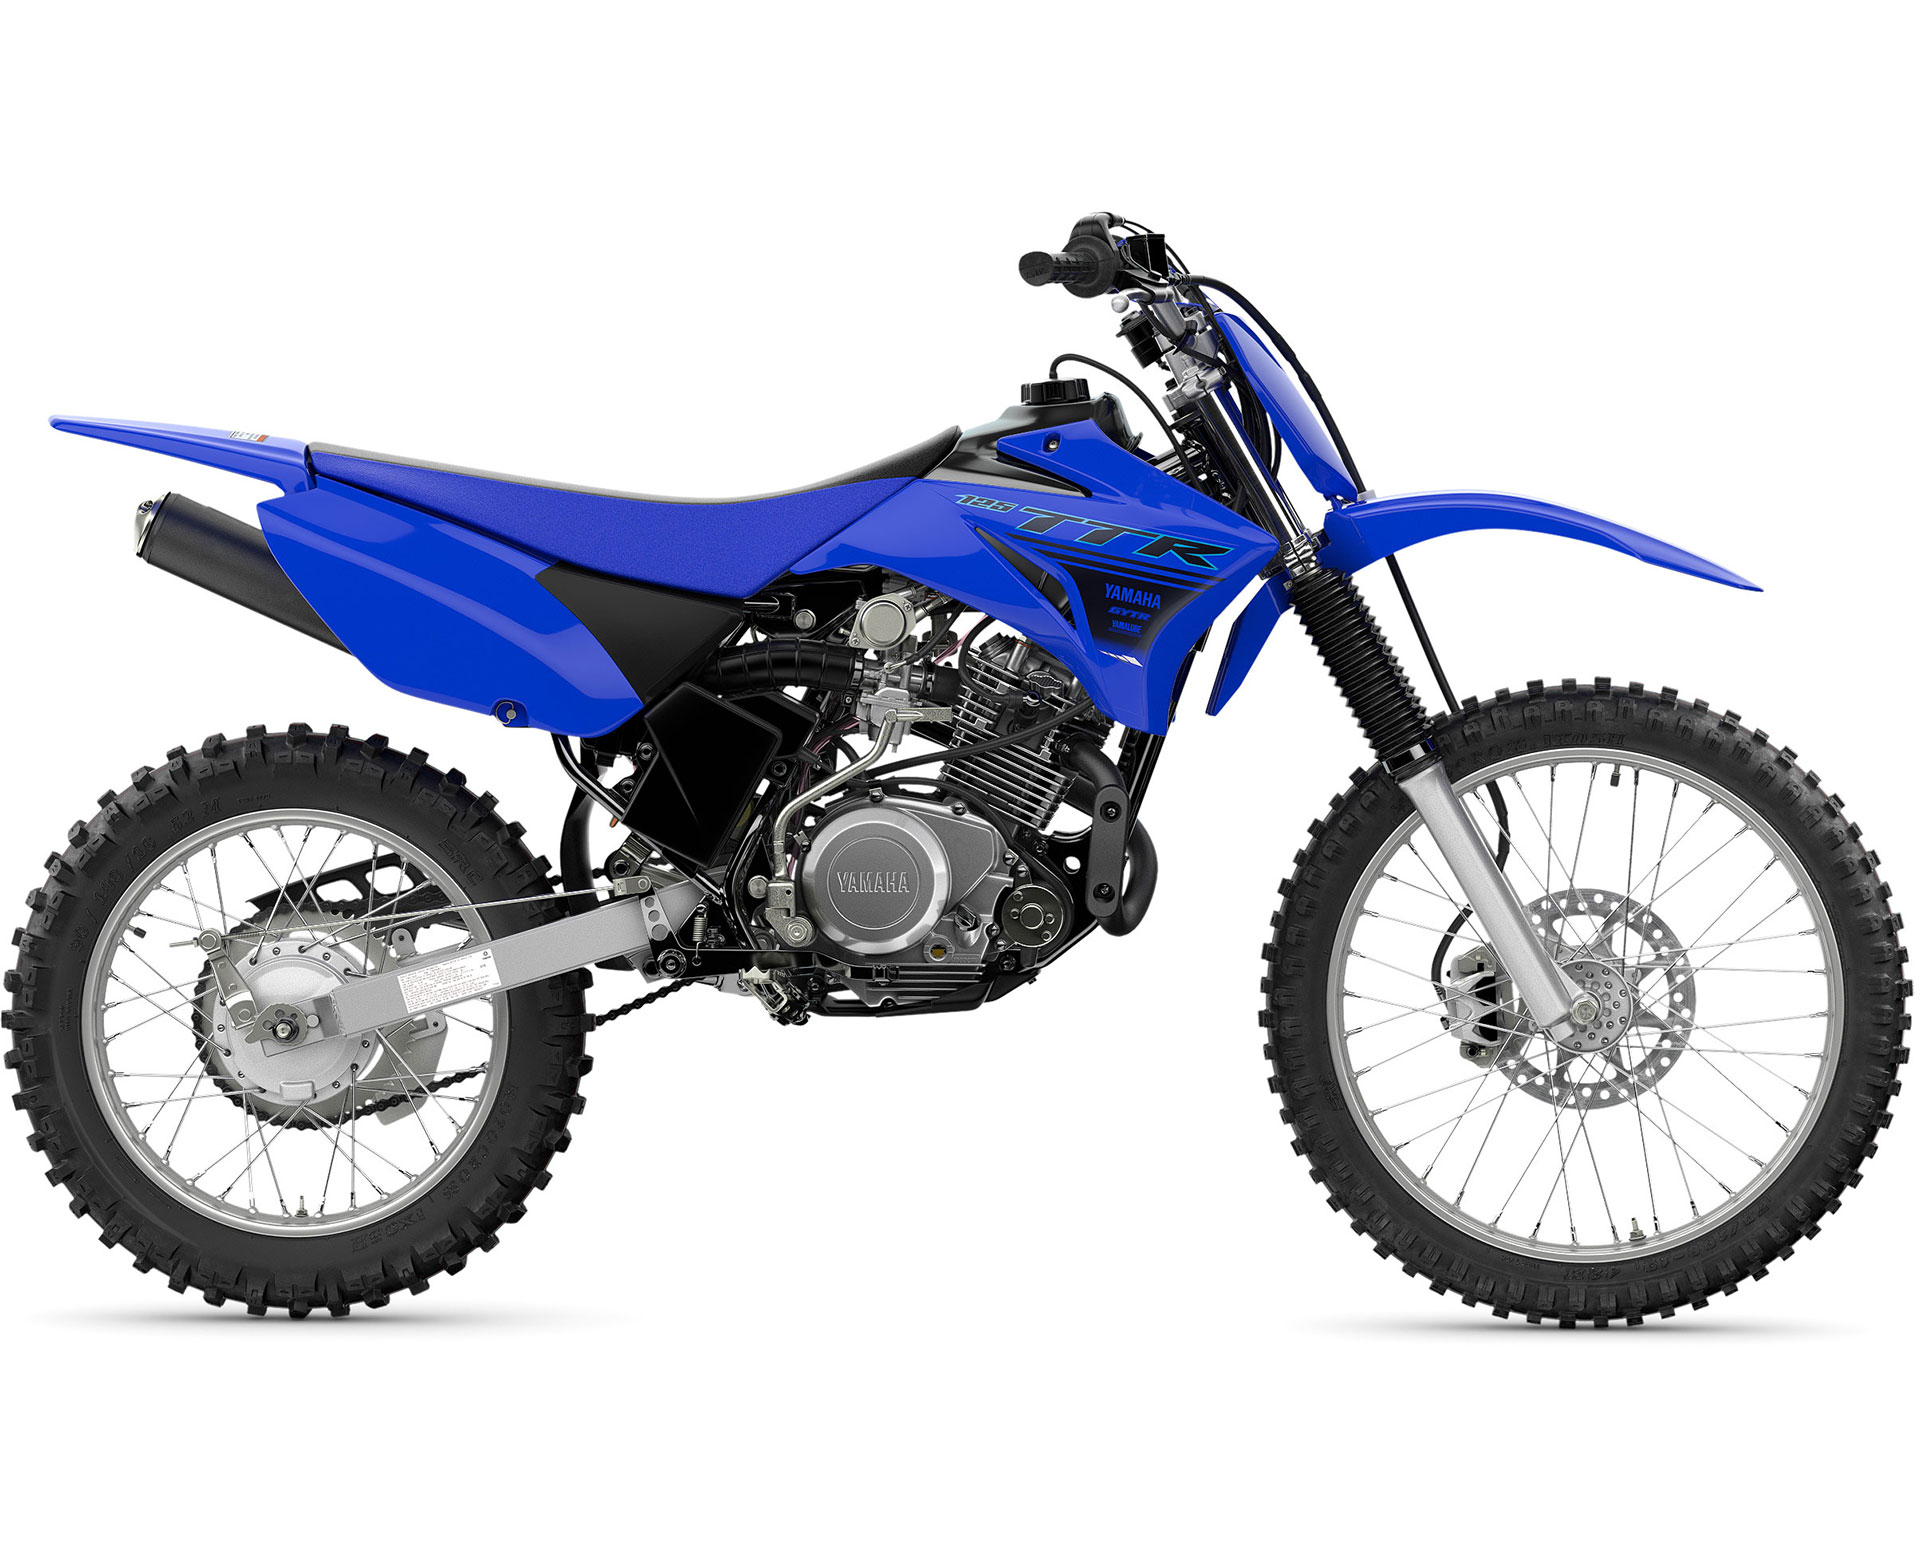 Thumbnail of your customized TT-R 125 2024